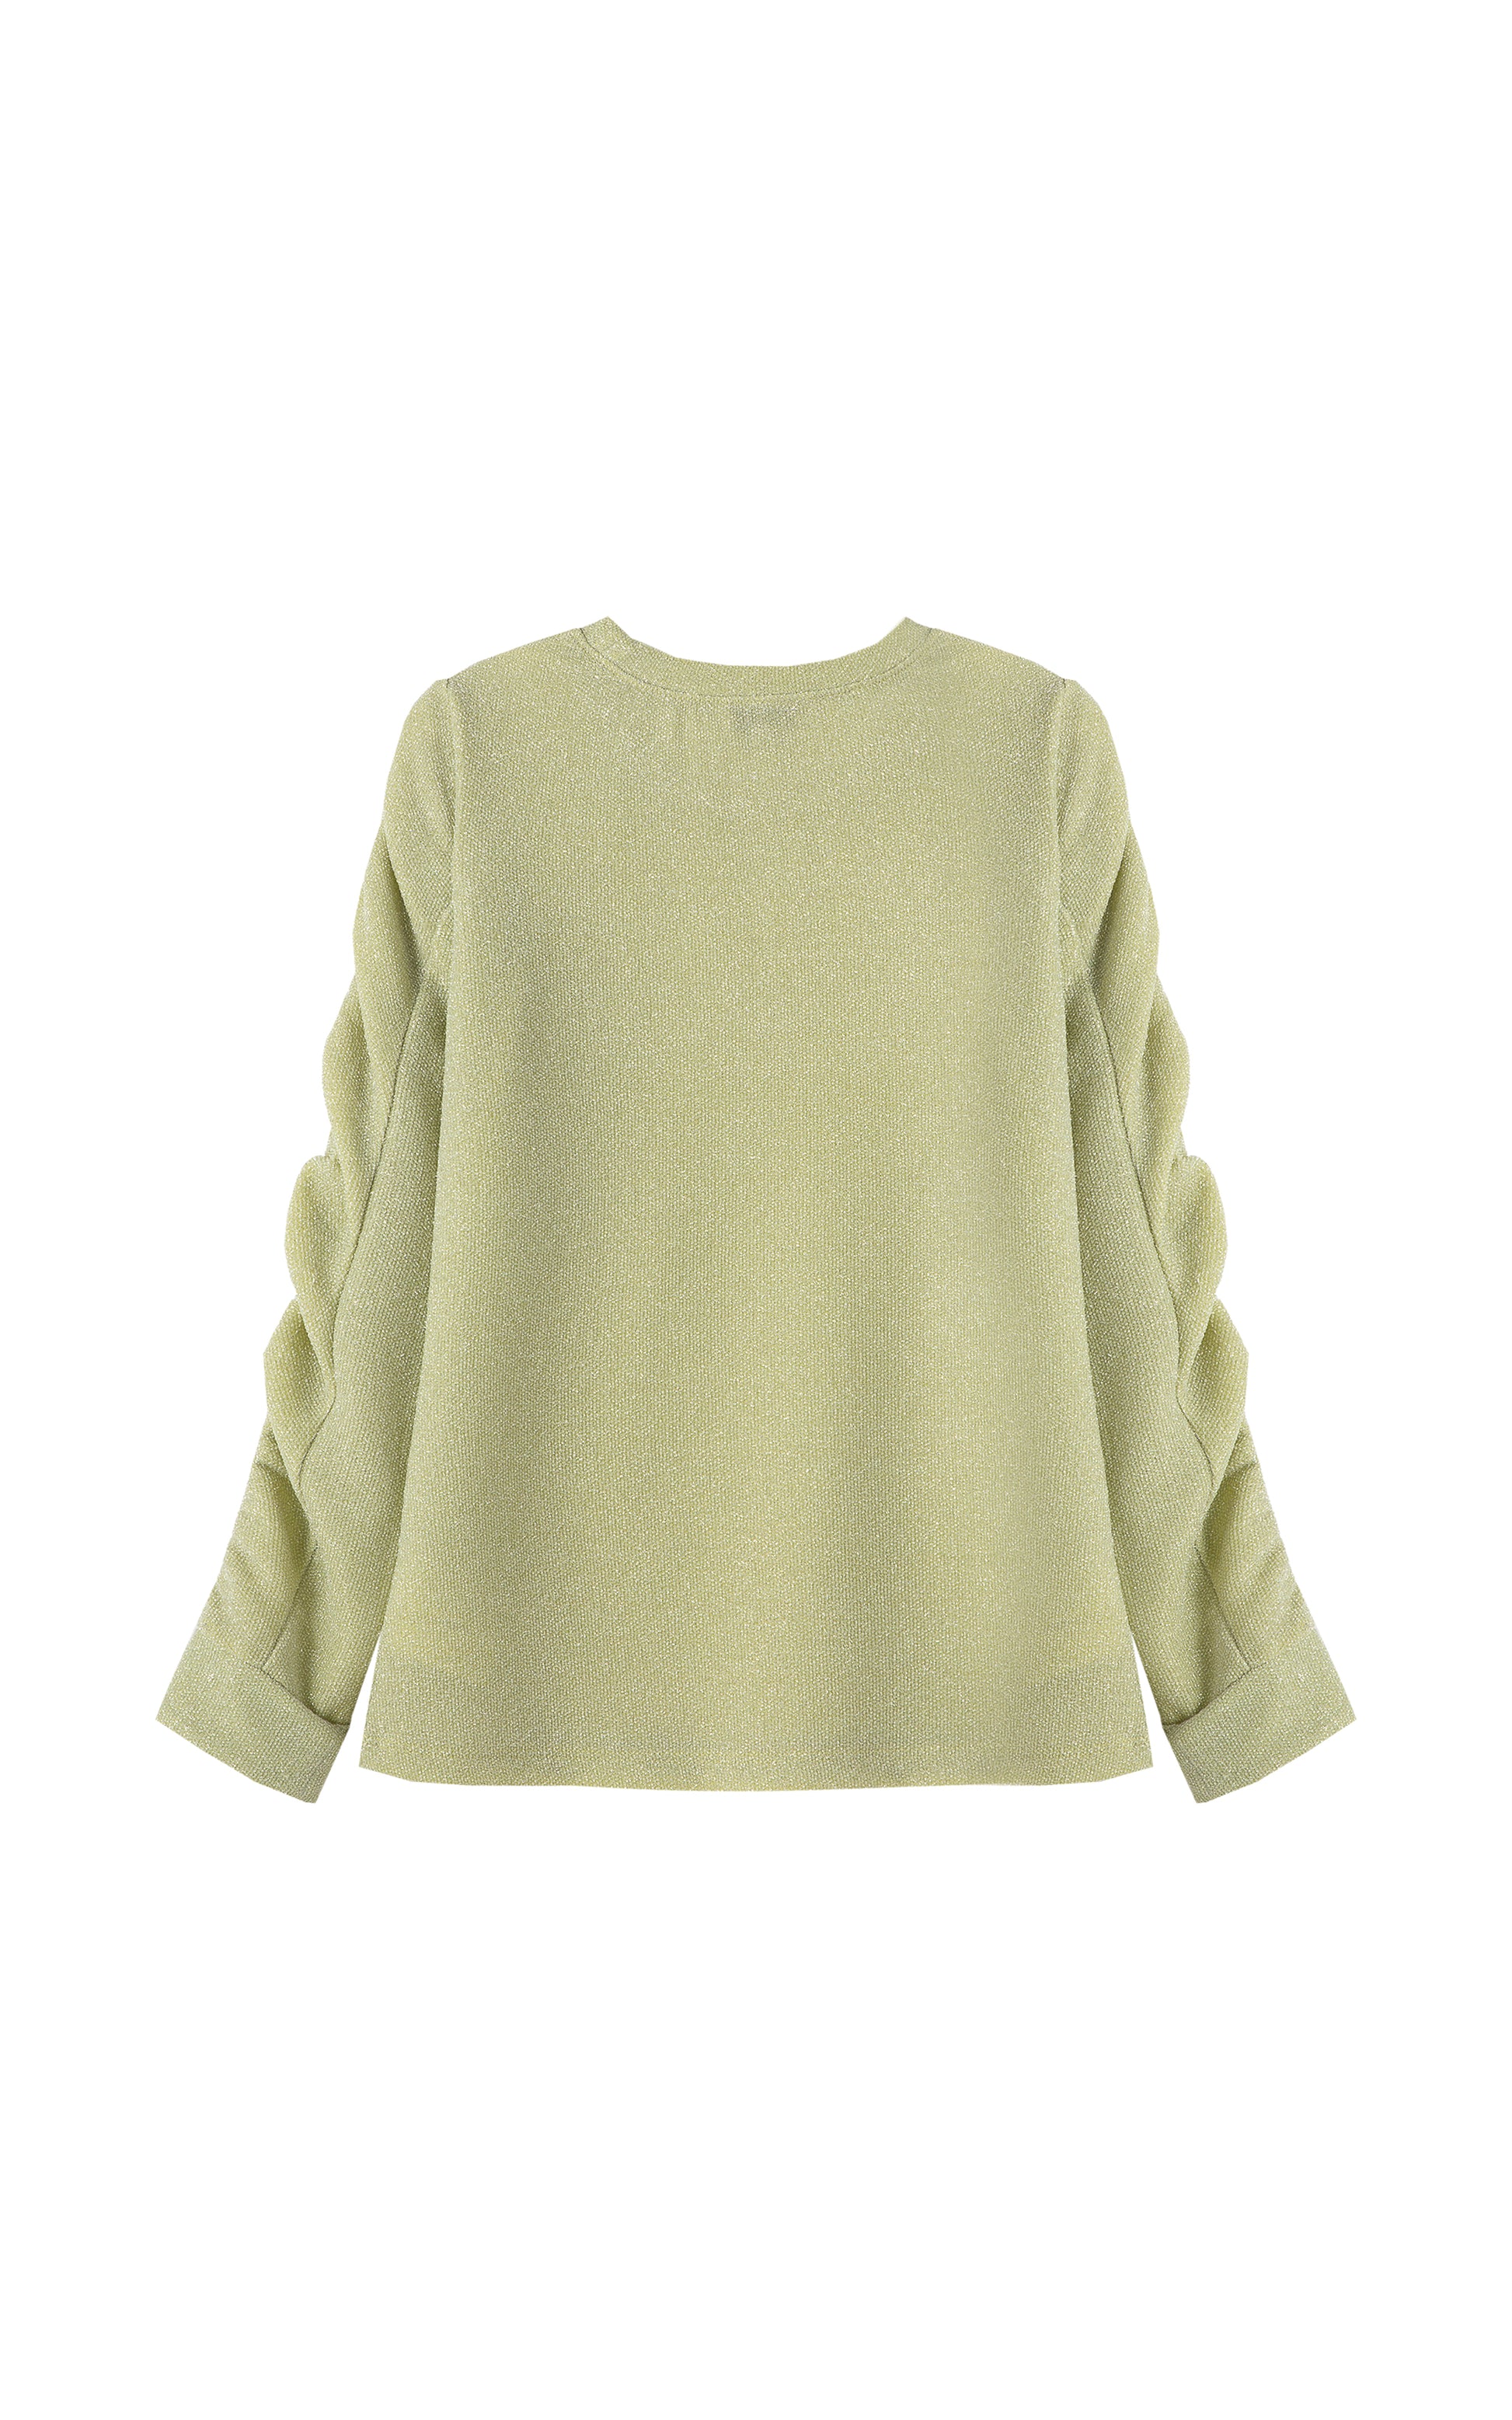 Back view of light green crewneck top with metallic accents and gathered, long sleeves.